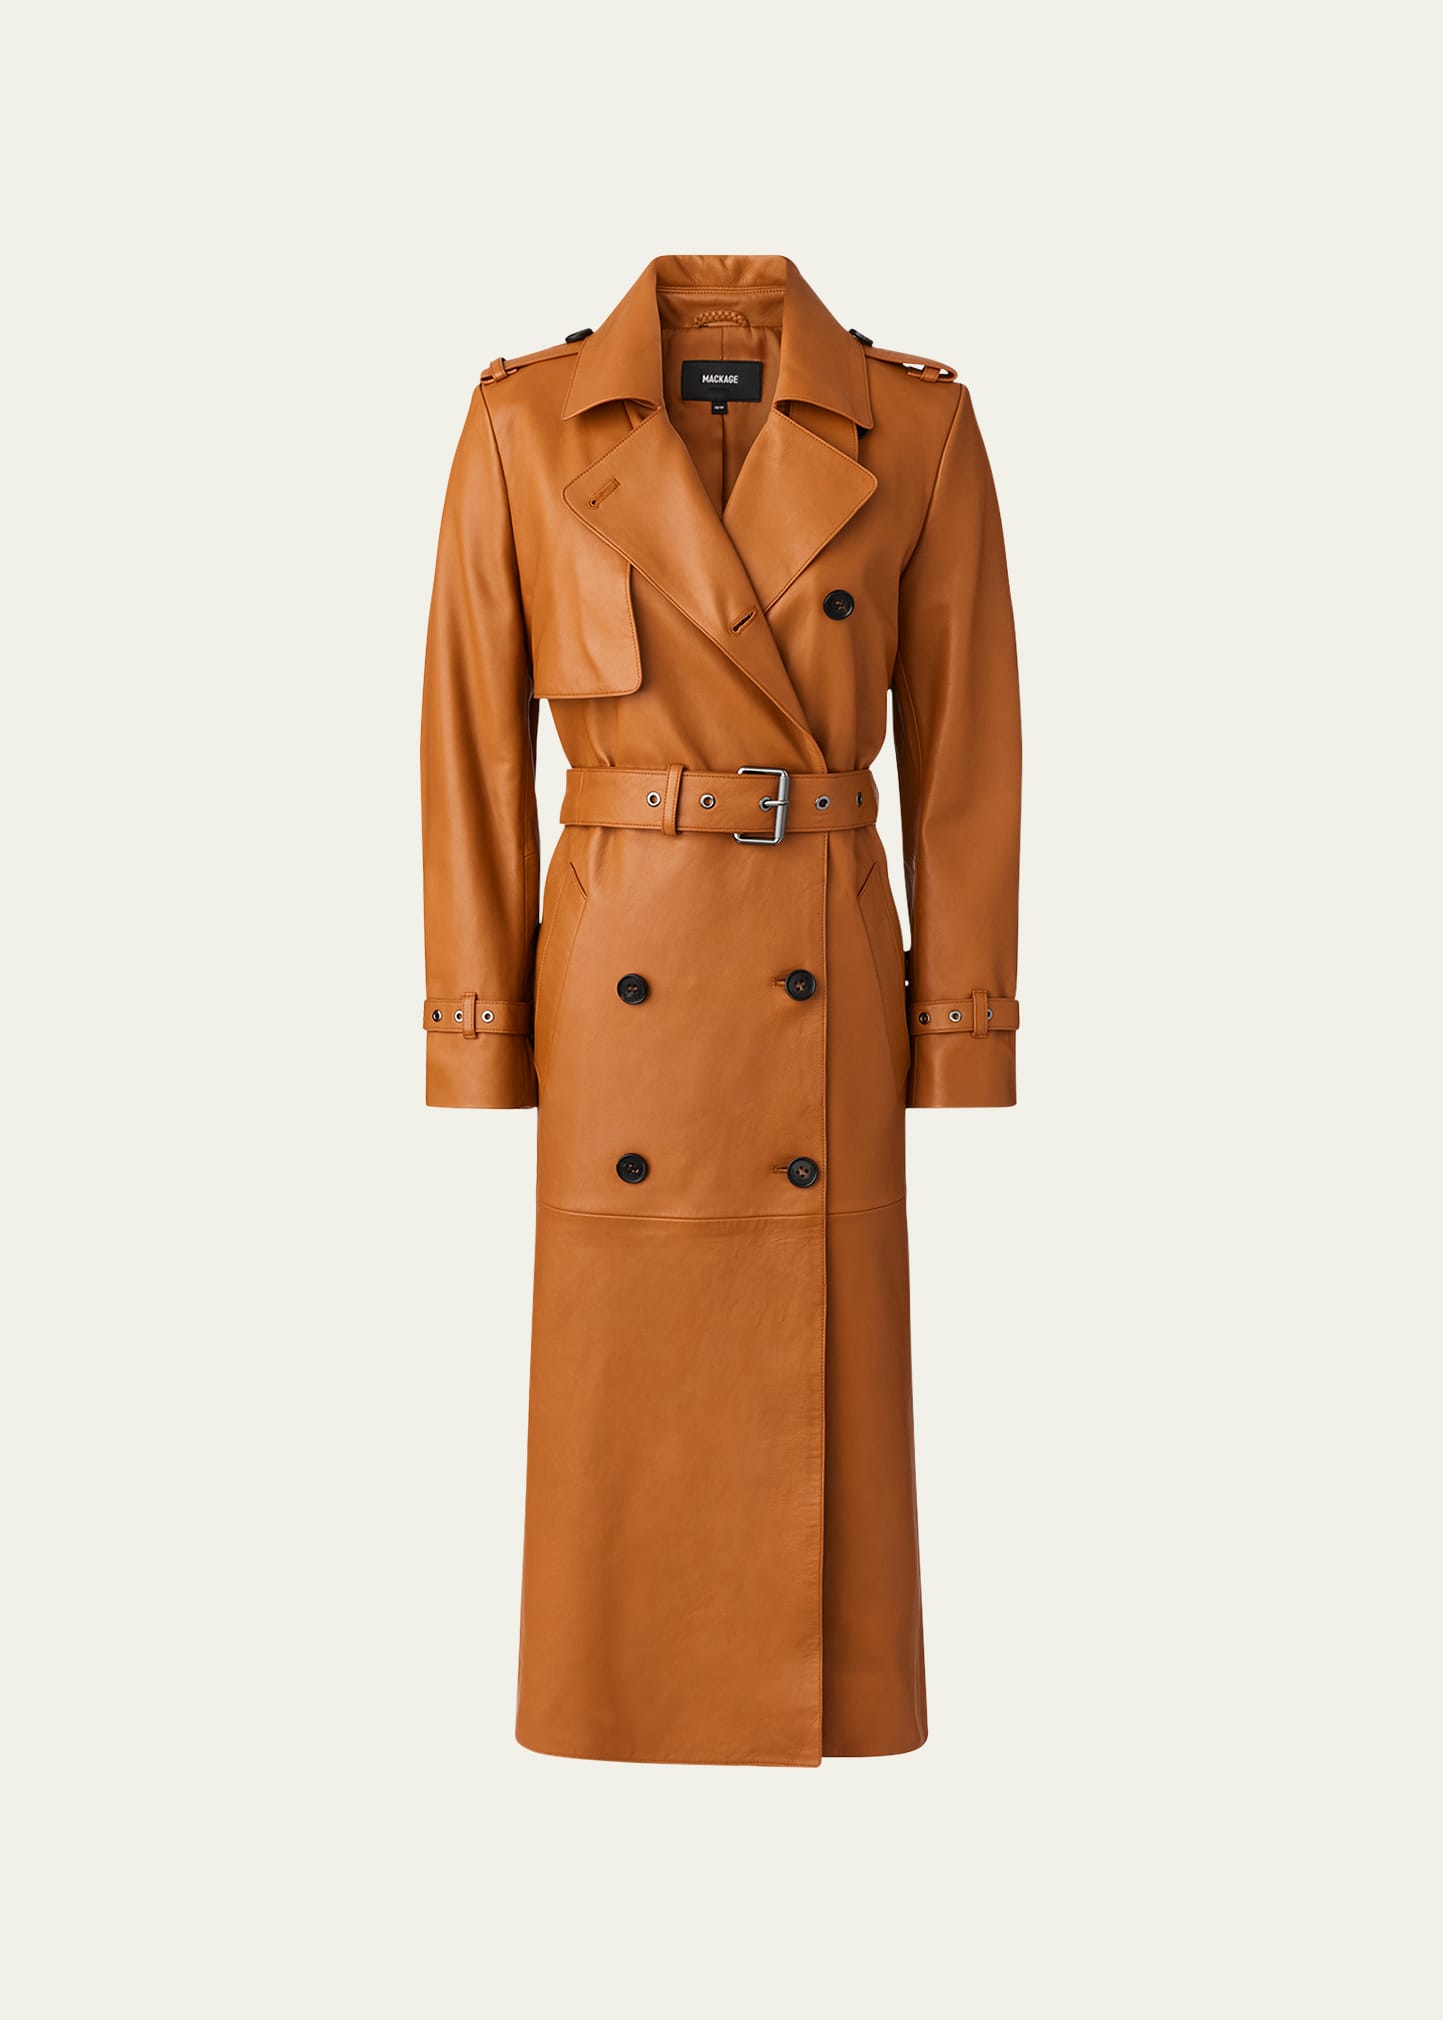 Gael (R) Leather Belted Trench Coat